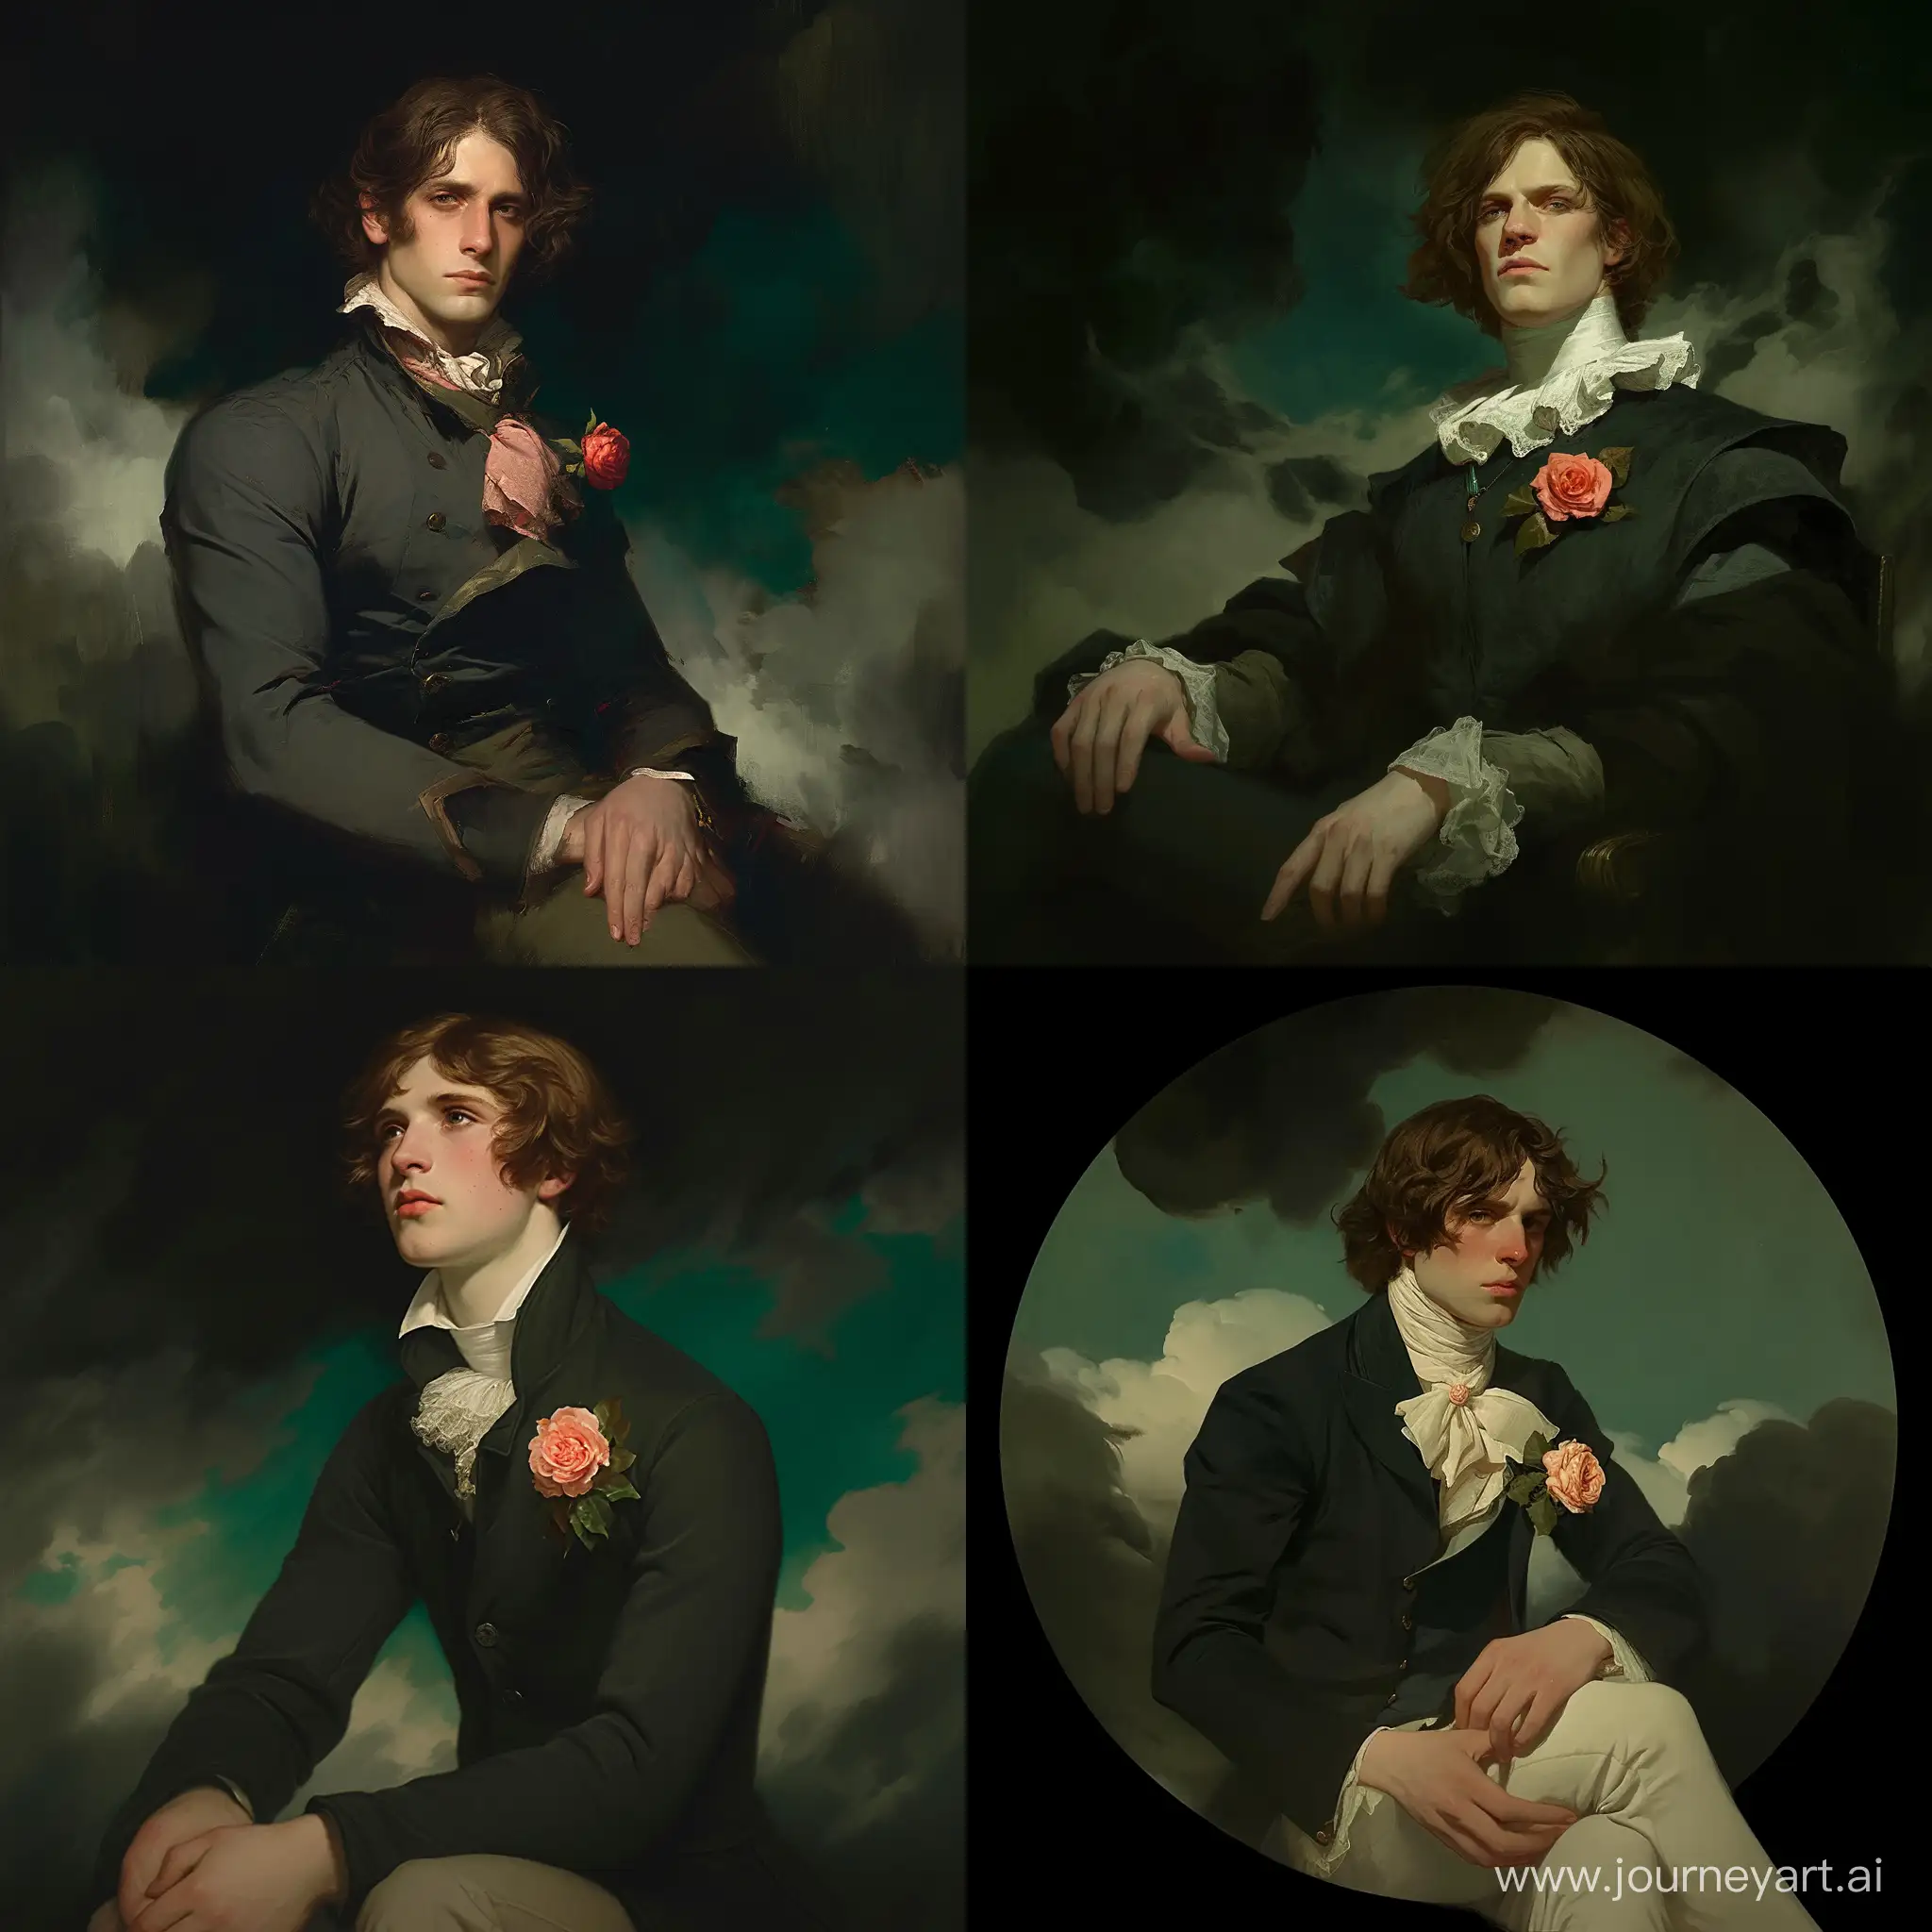 Medieval European portrait painting in style of Thomas Lawrence, depicting a young middle aged man with brown hairs, sitting and wearing full collar Victorian attire, rose flower on lapel, dark black greenish cloudy background --niji 6